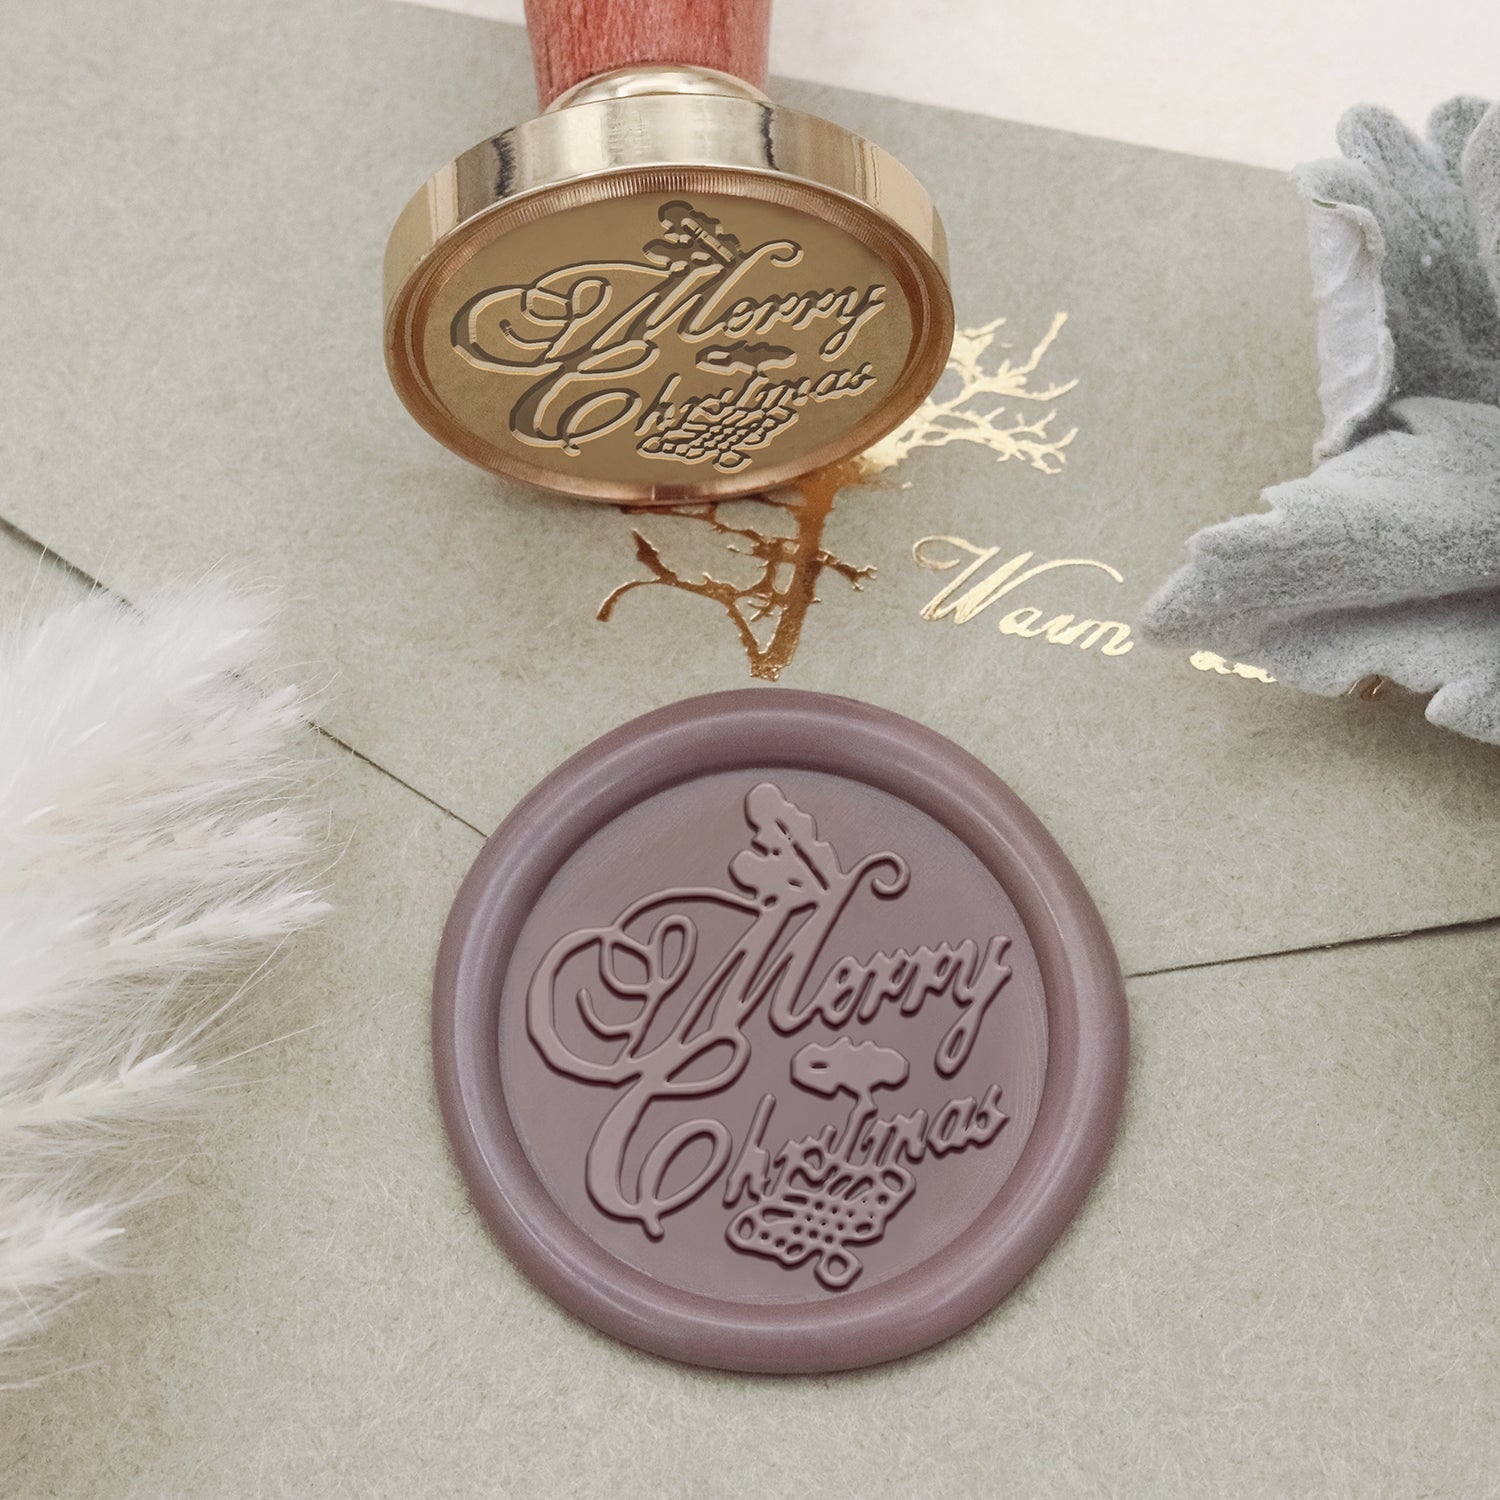 Stamprints Greeting Wax Seal Stamp - Merry Christmas 2